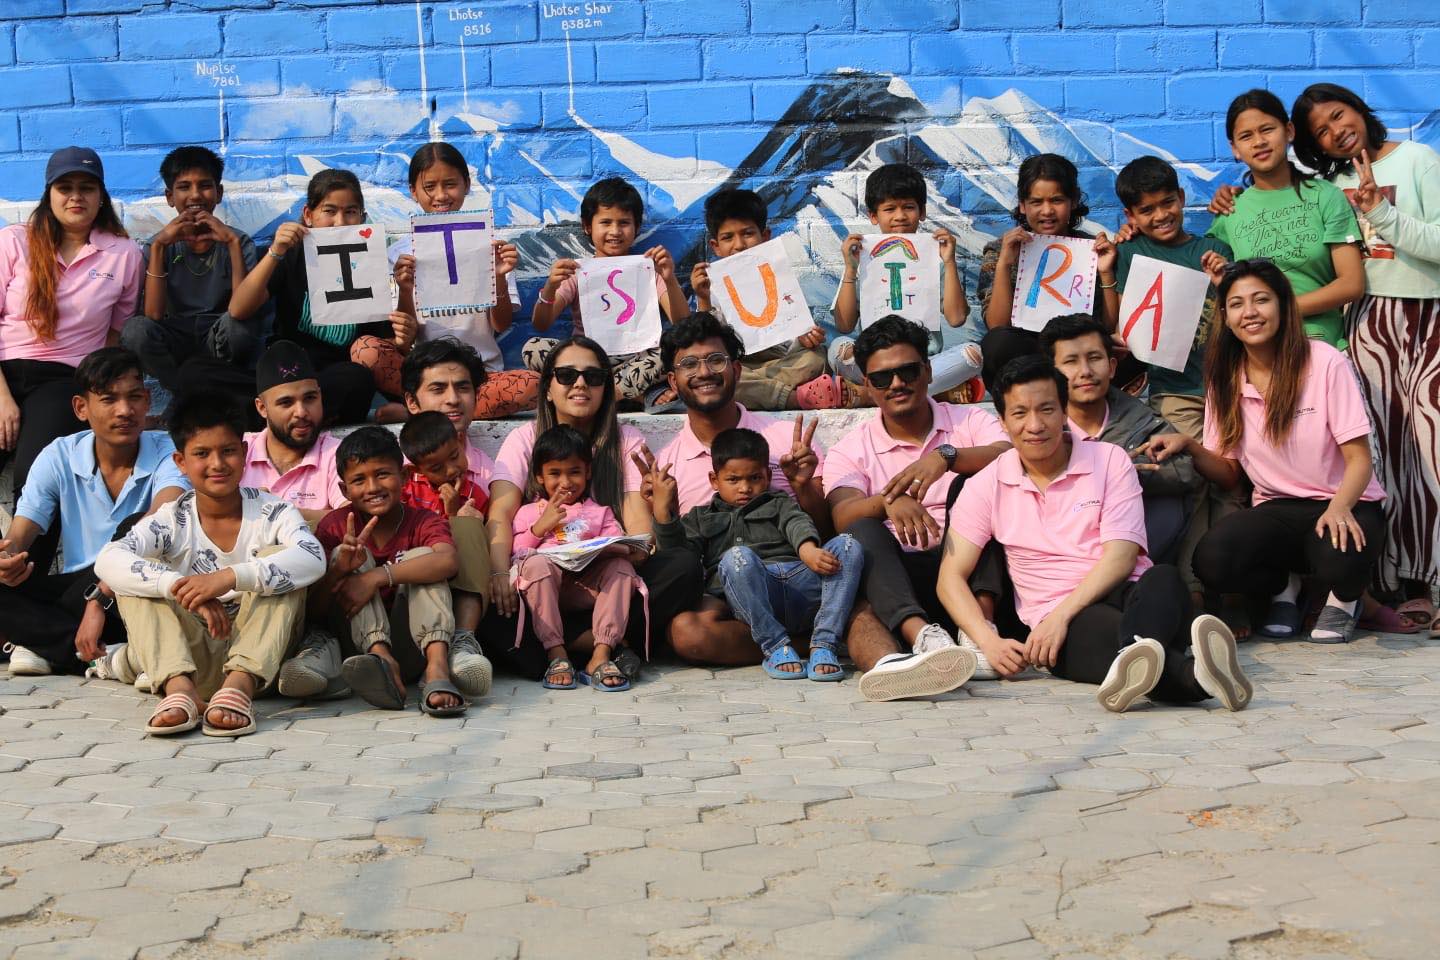 ITsutra Inc Extends Support to Mountain Children's Home in Buddhanilkantha